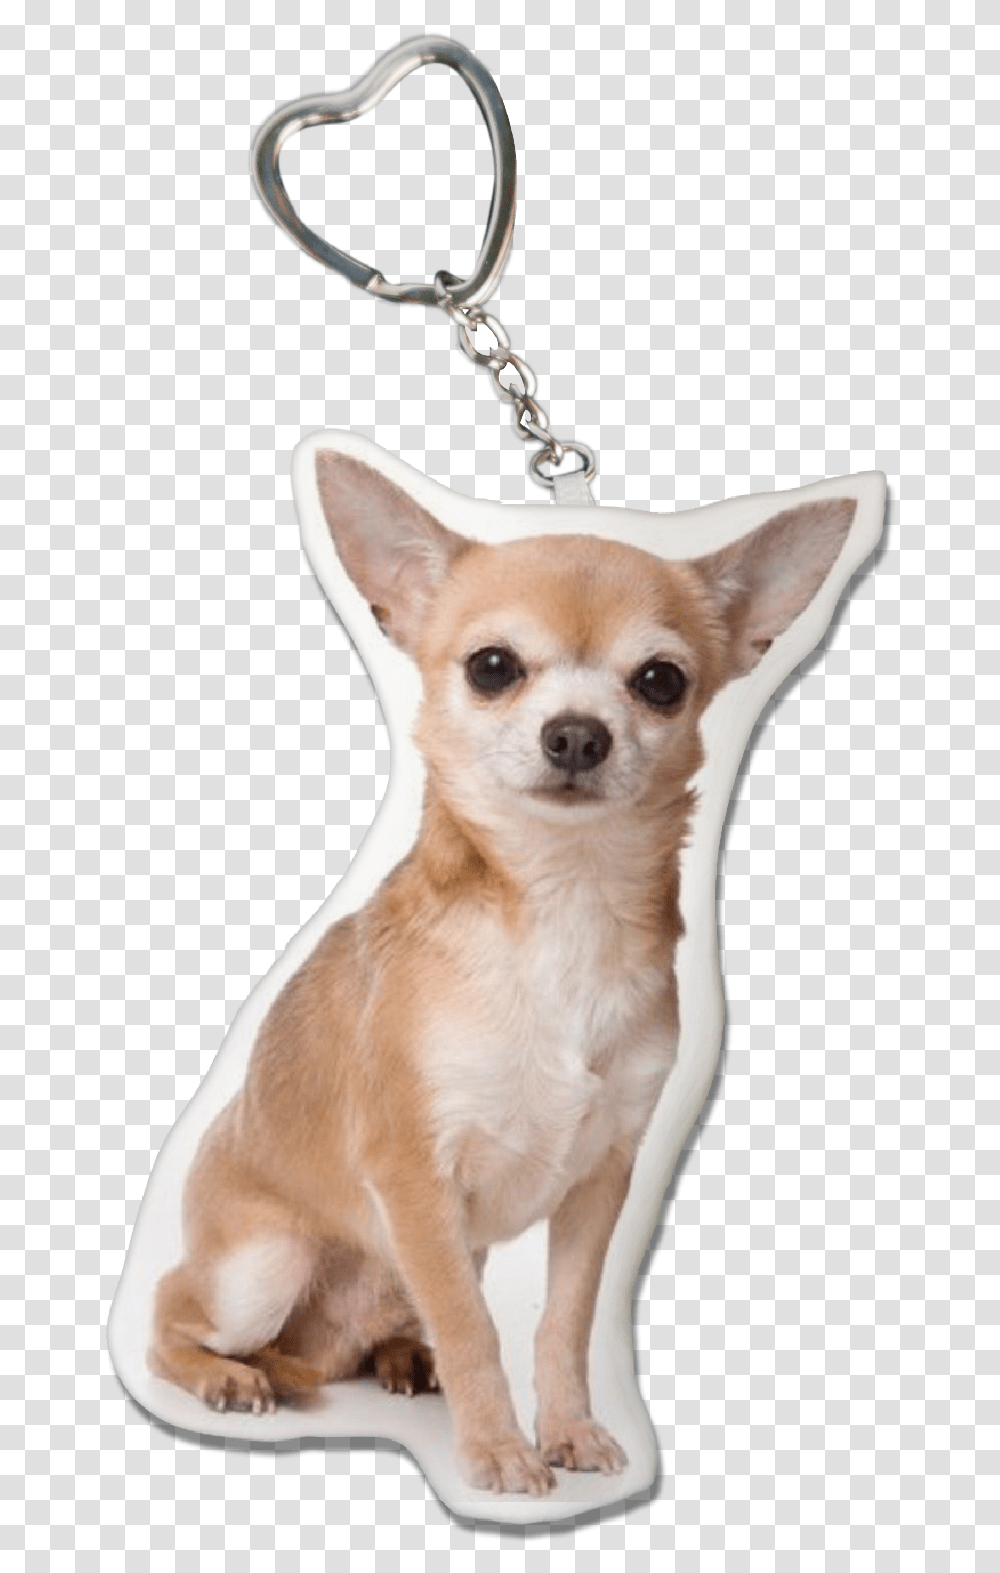 Chihuahua Key Chain Chihuahua Collectibles, Dog, Pet, Canine, Animal Transparent Png